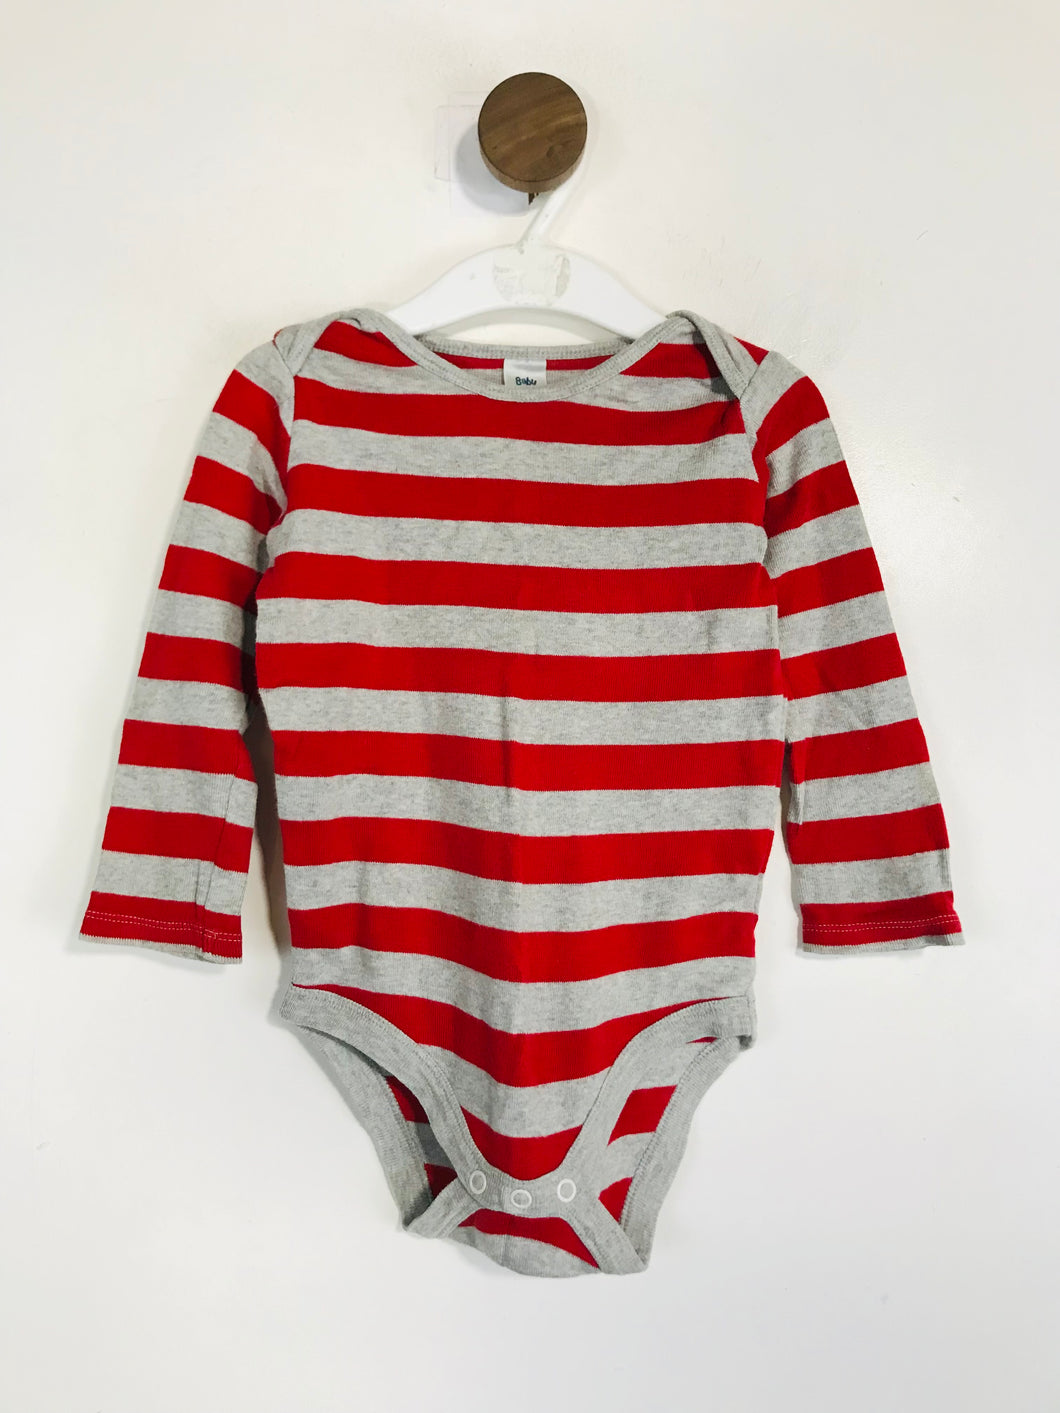 Baby Boden Kid's Striped Babygrow Playsuit | 18-24 Months | Red